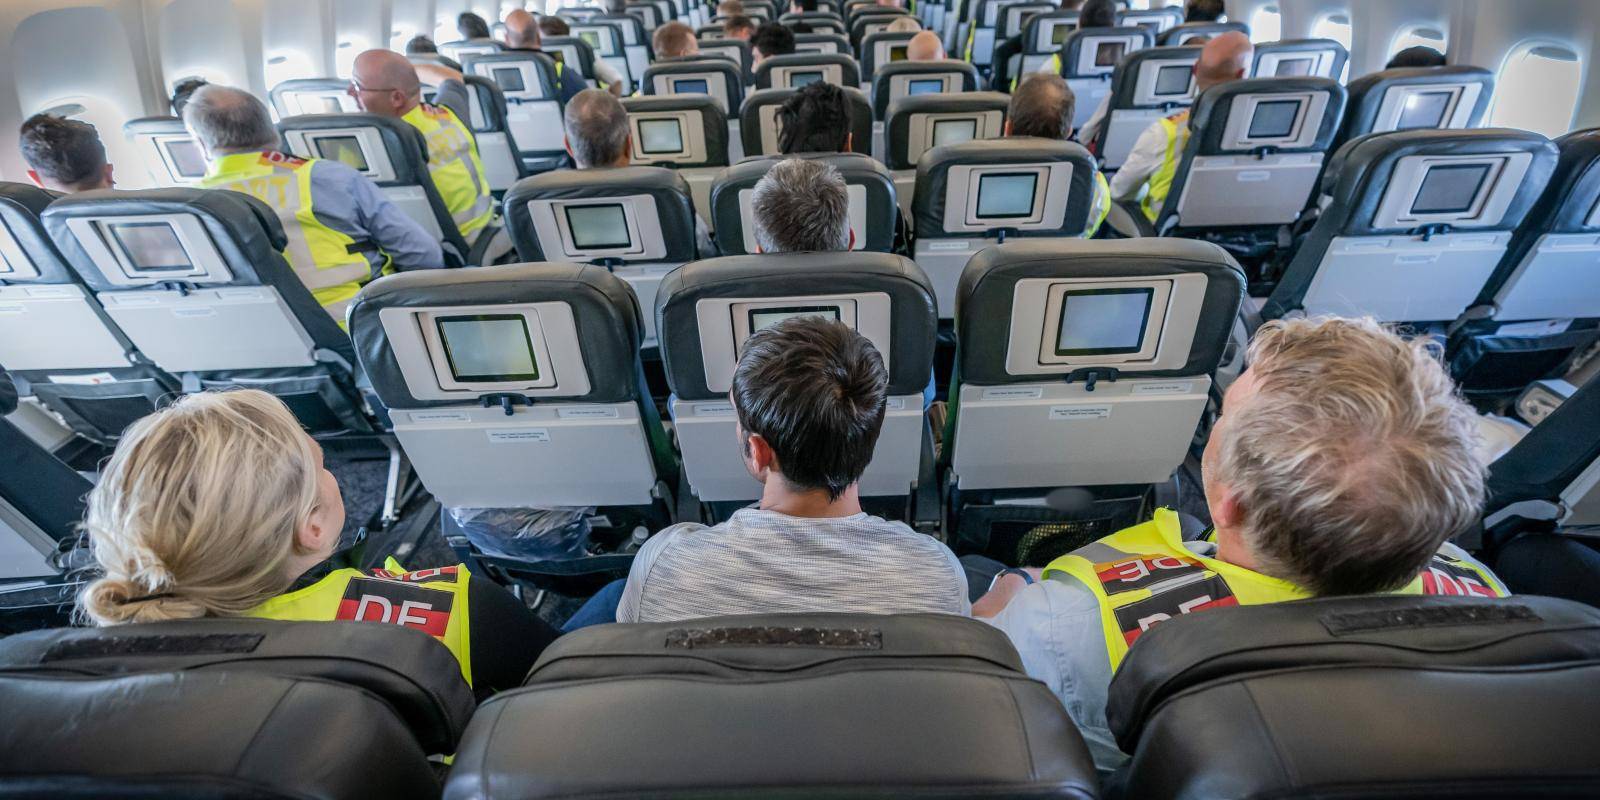 Police officers escort rejected Afghan asylum seekers aboard an aircraft heading to Kabul, on 1 August 2019 at an airport in Leipzig, Germany.